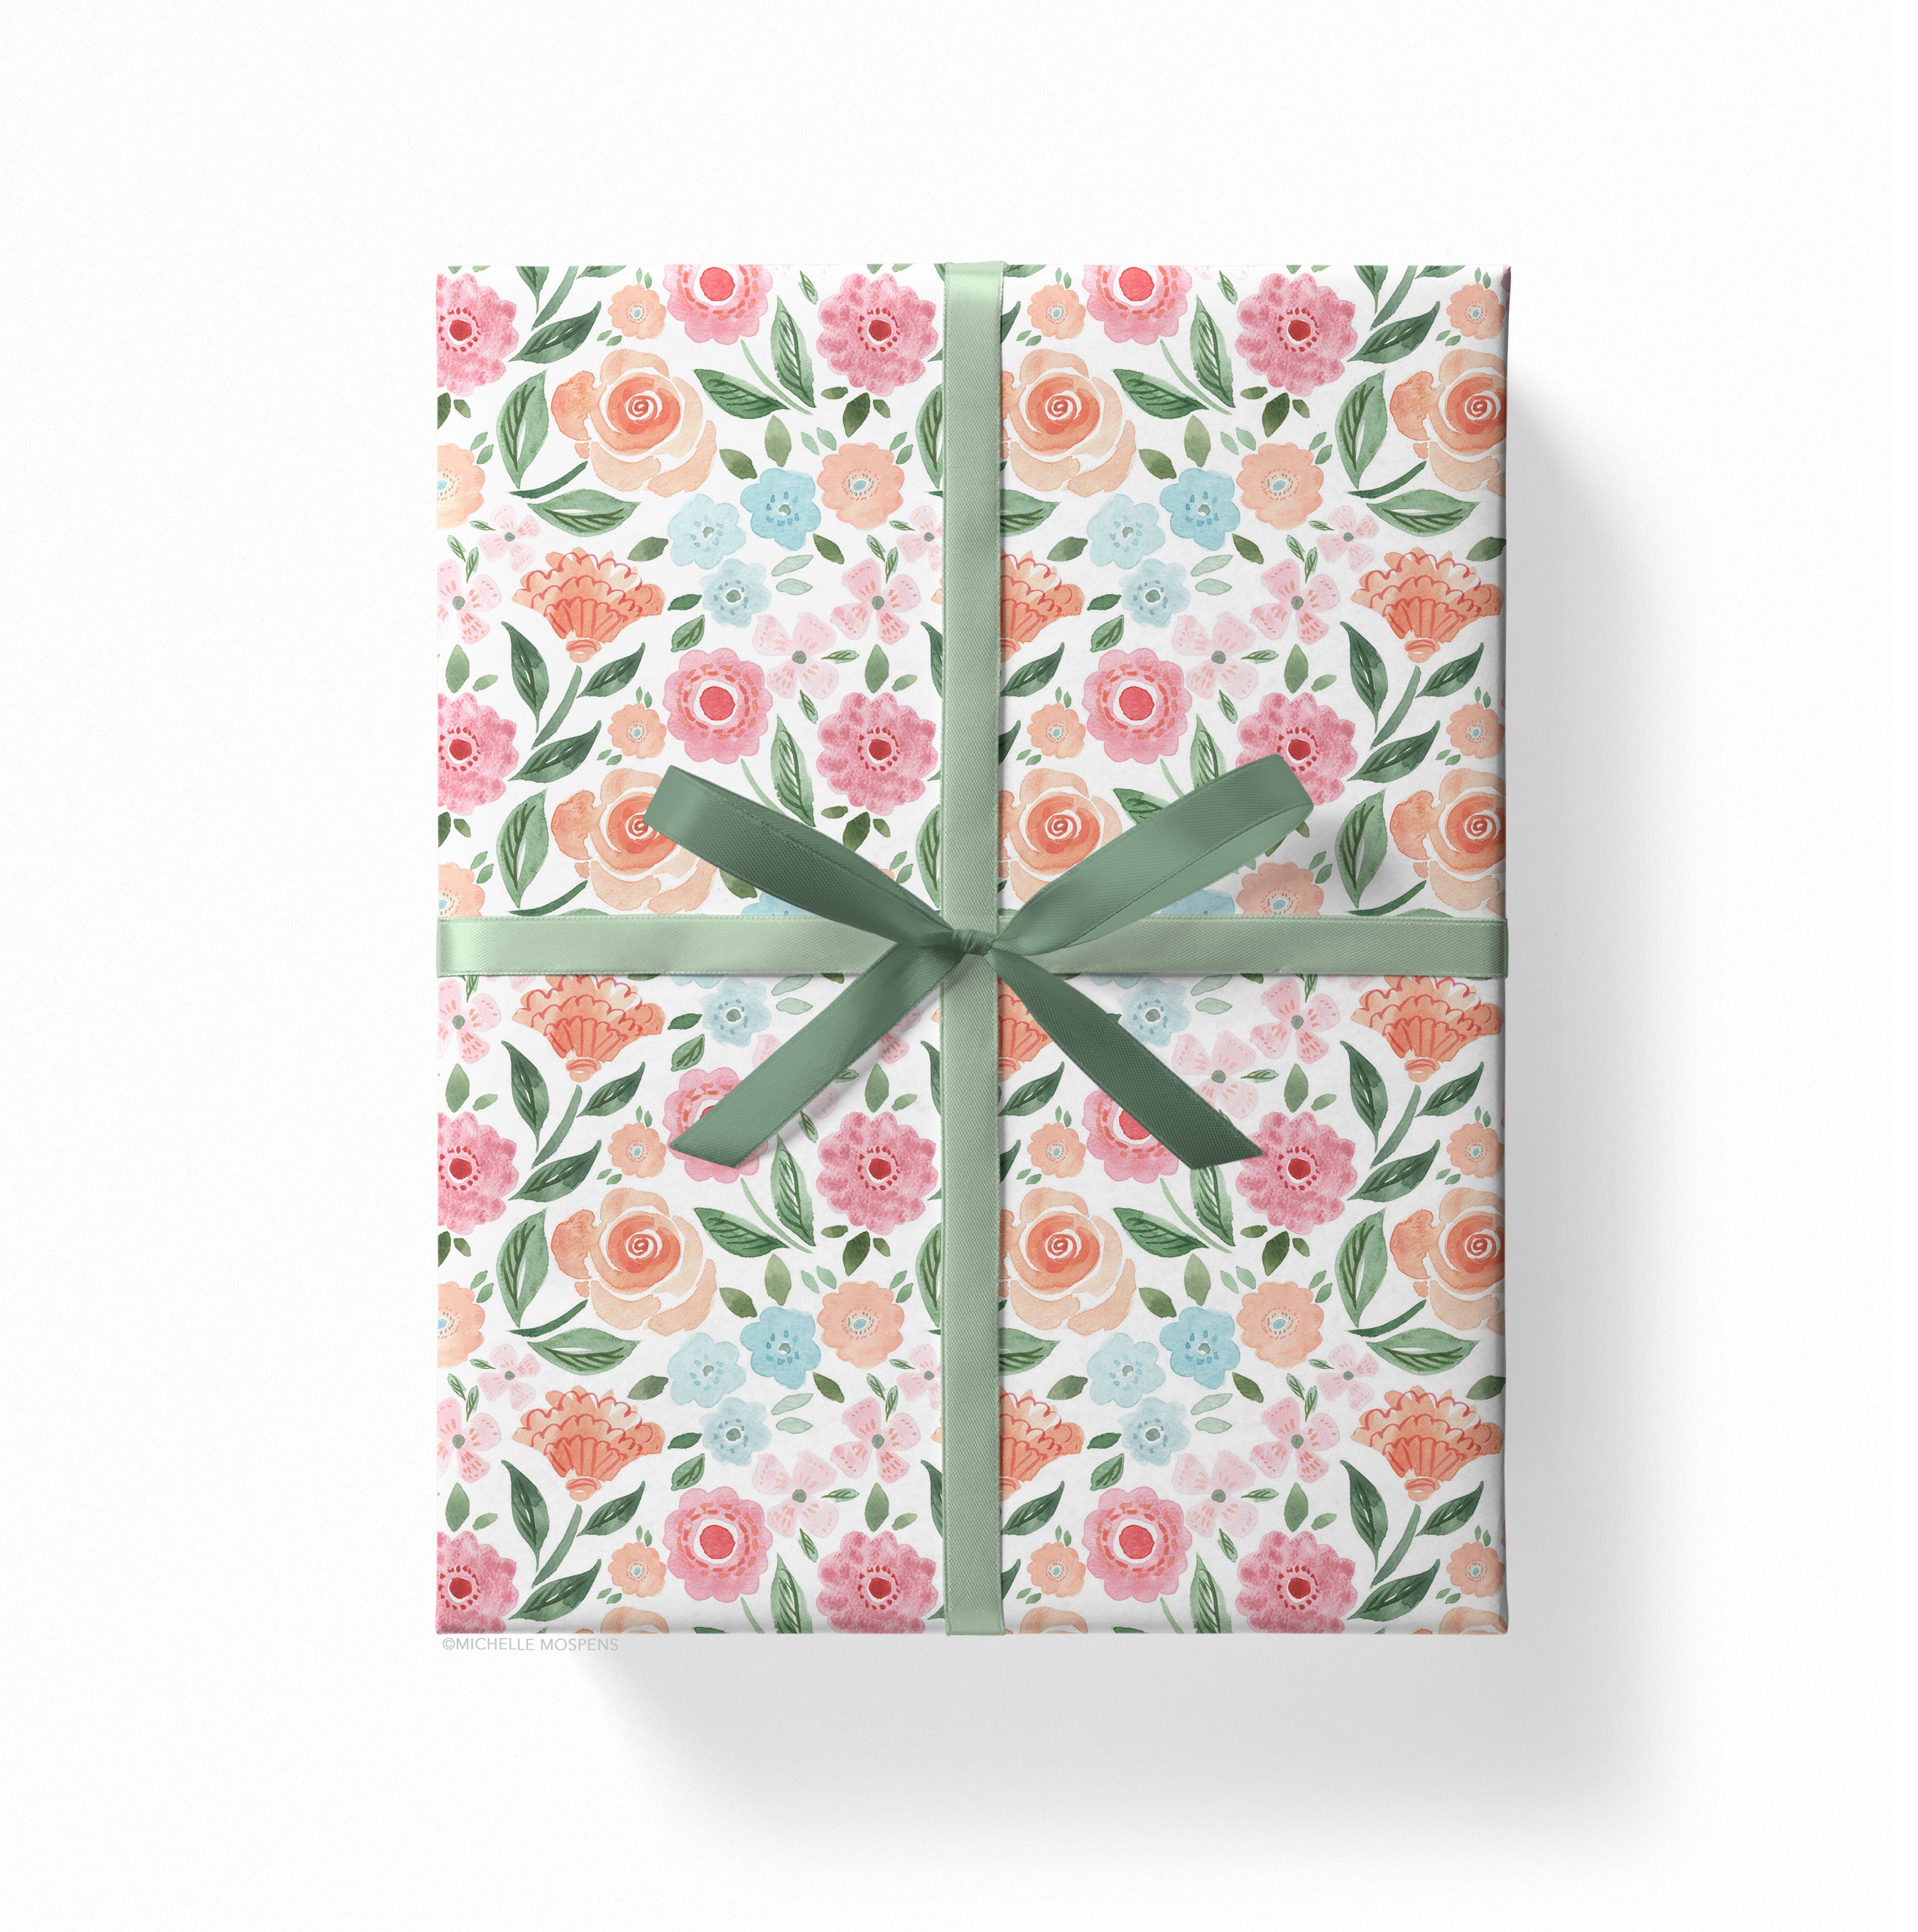 Wrapping Paper, Watercolor Tropical Flowers Wrapping Paper by Michelle  Mospens, Beach Wrapping Paper, Holiday, Christmas, Birthday Gift Wrap